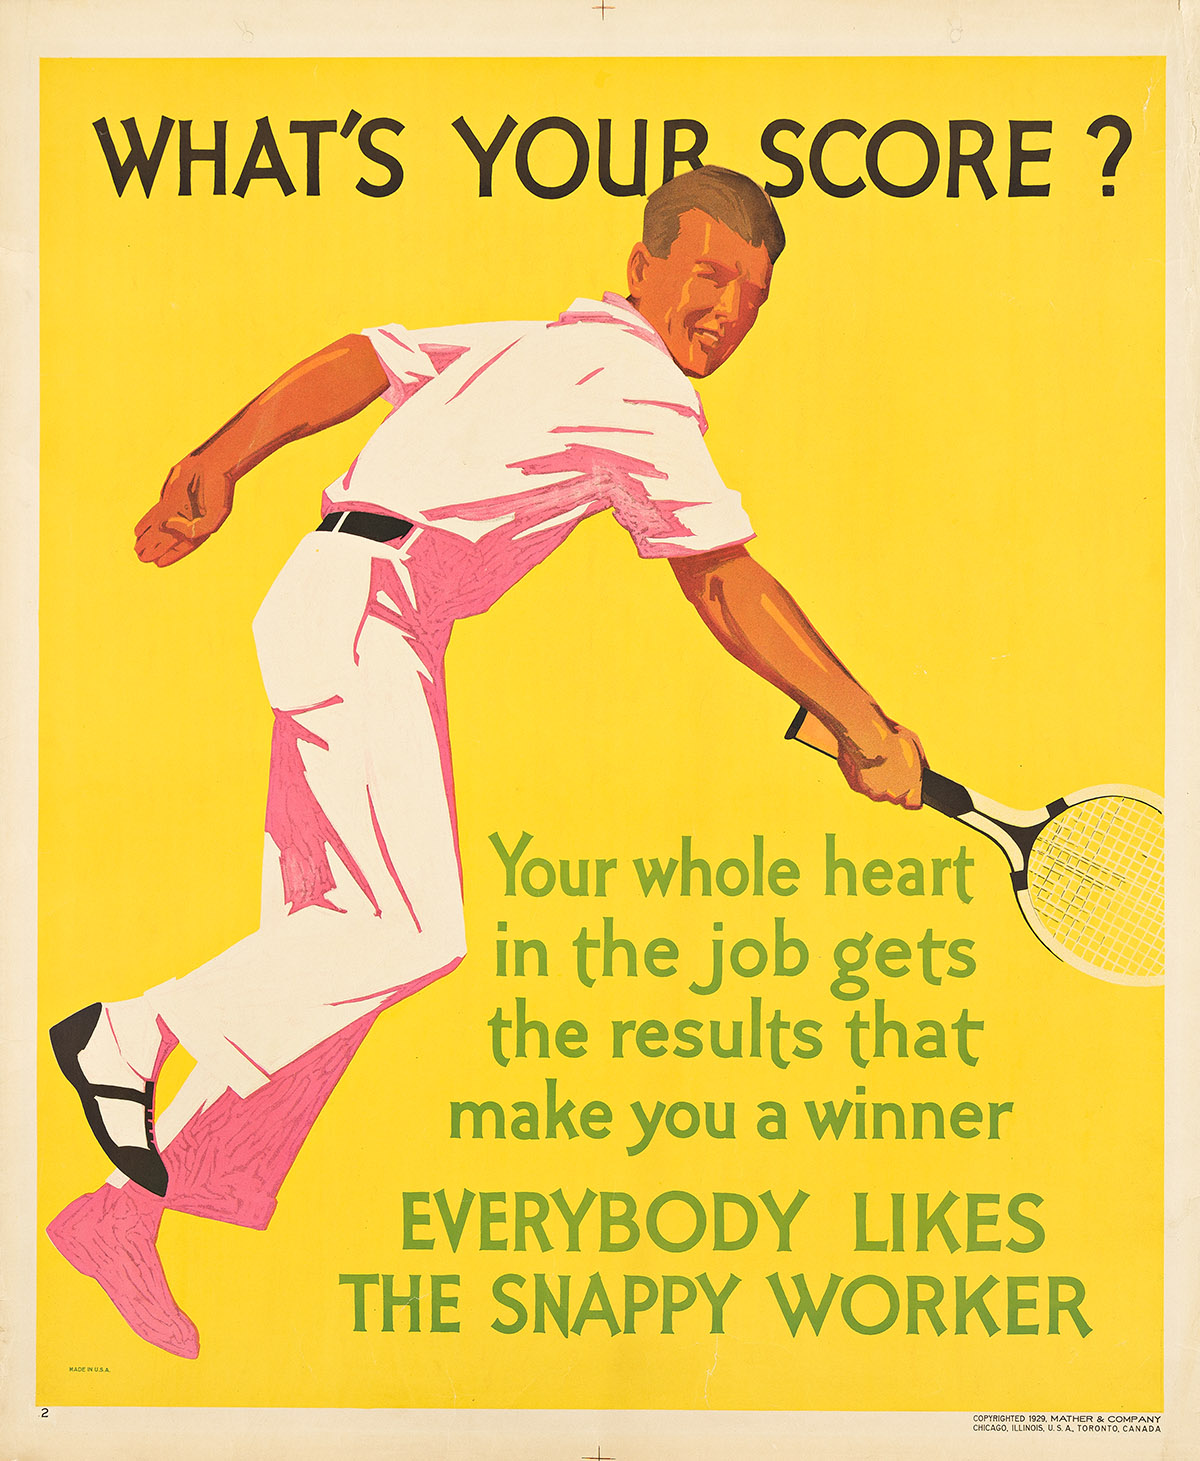 DESIGNER UNKNOWN. WHATS YOUR SCORE? / EVERYBODY LIKES THE SNAPPY WORKER. 1929. 44x36¼ inches, 111¾x92 cm. Mather & Company, Chicago.